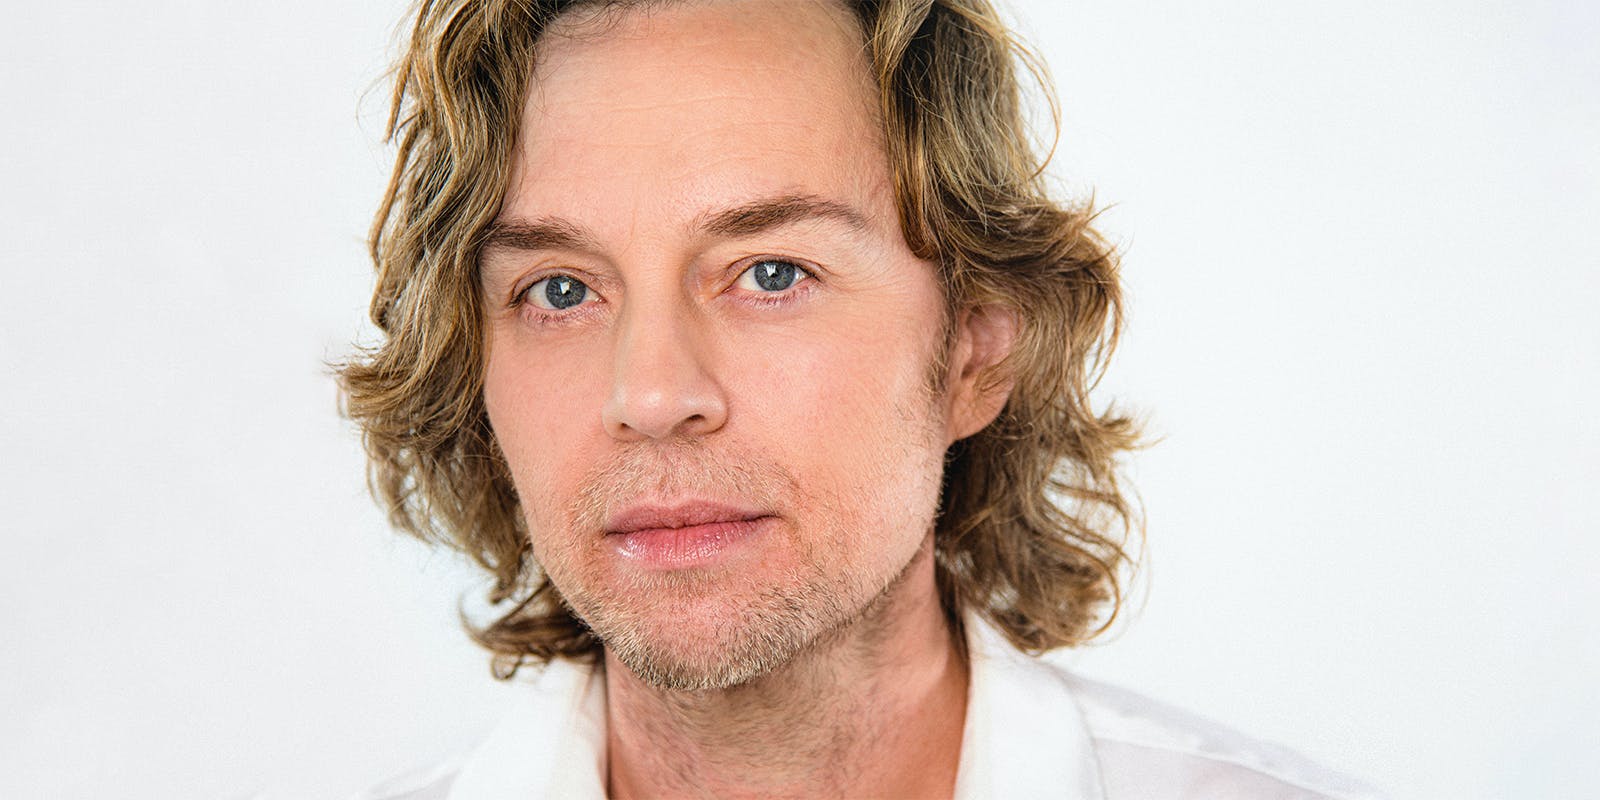 10 Extraordinary Facts About Darren Hayes - Facts.net